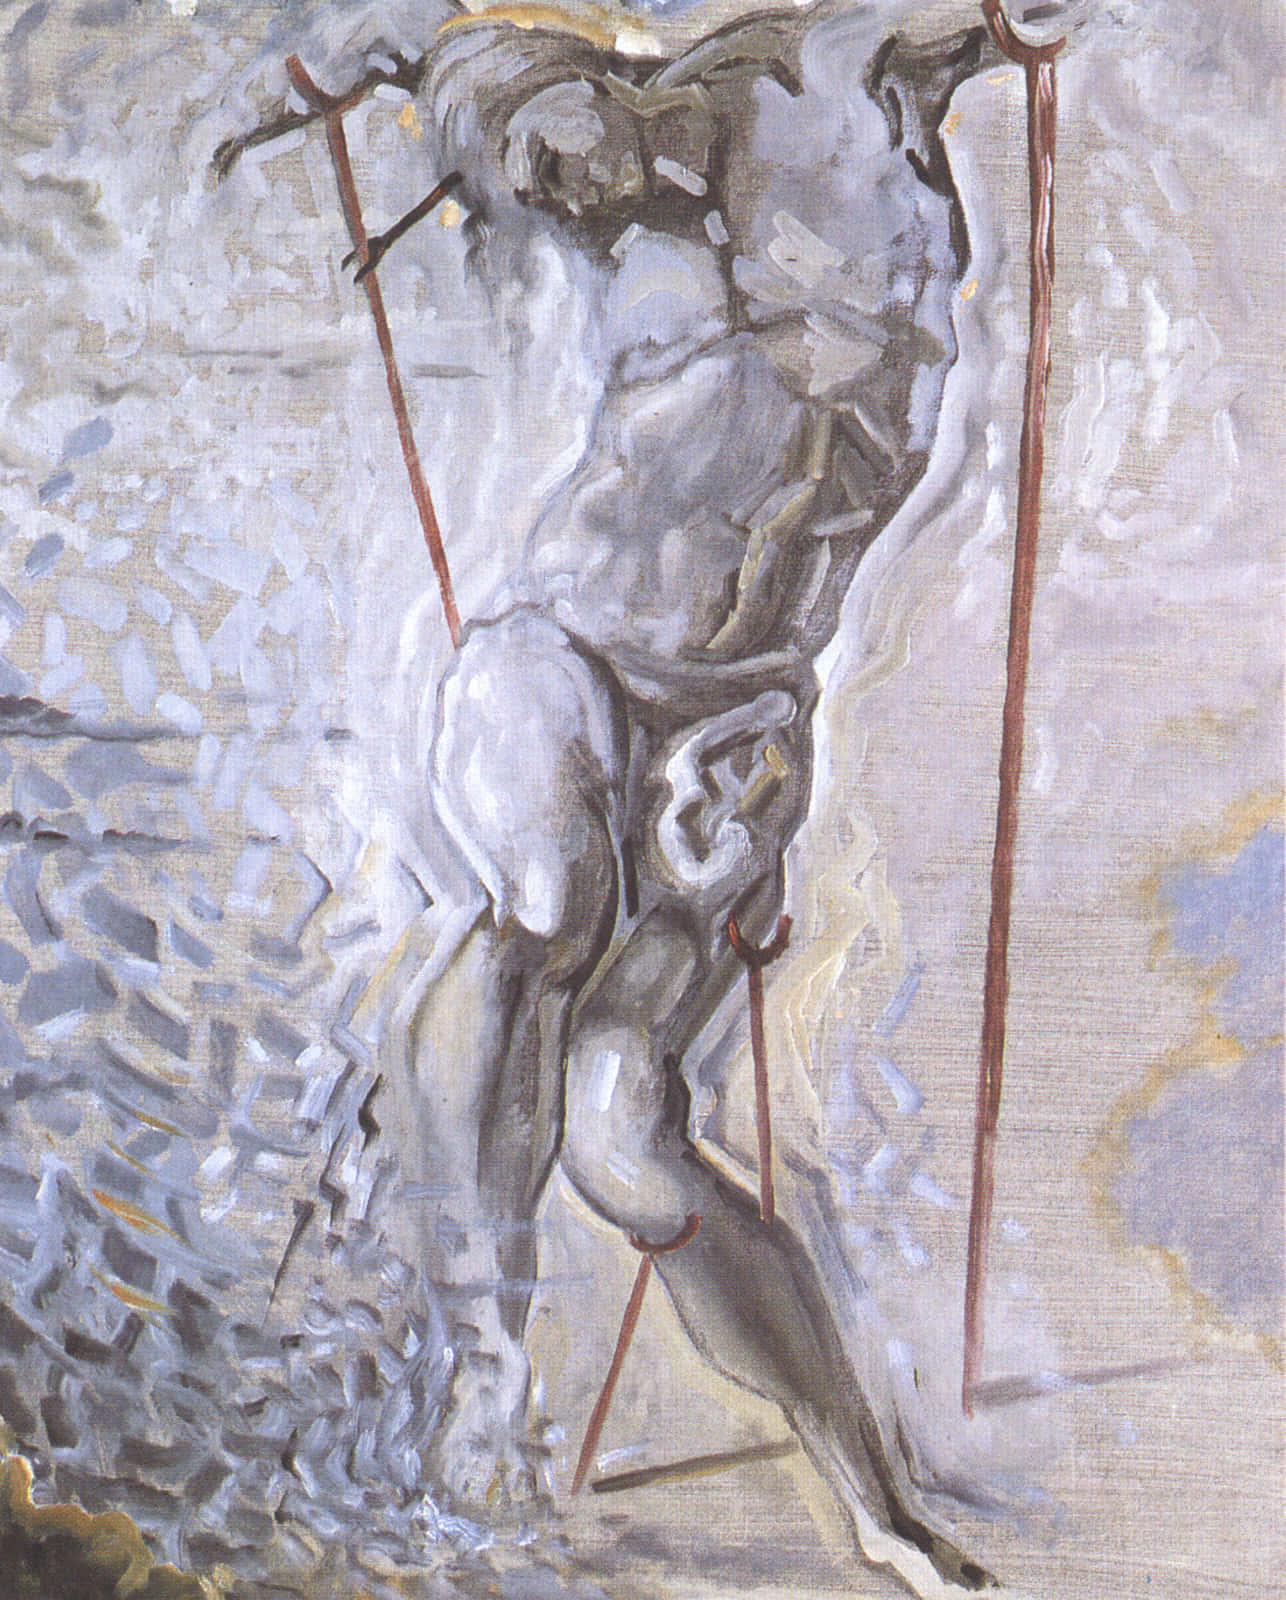 A Painting Of A Man Holding Skis Wallpaper